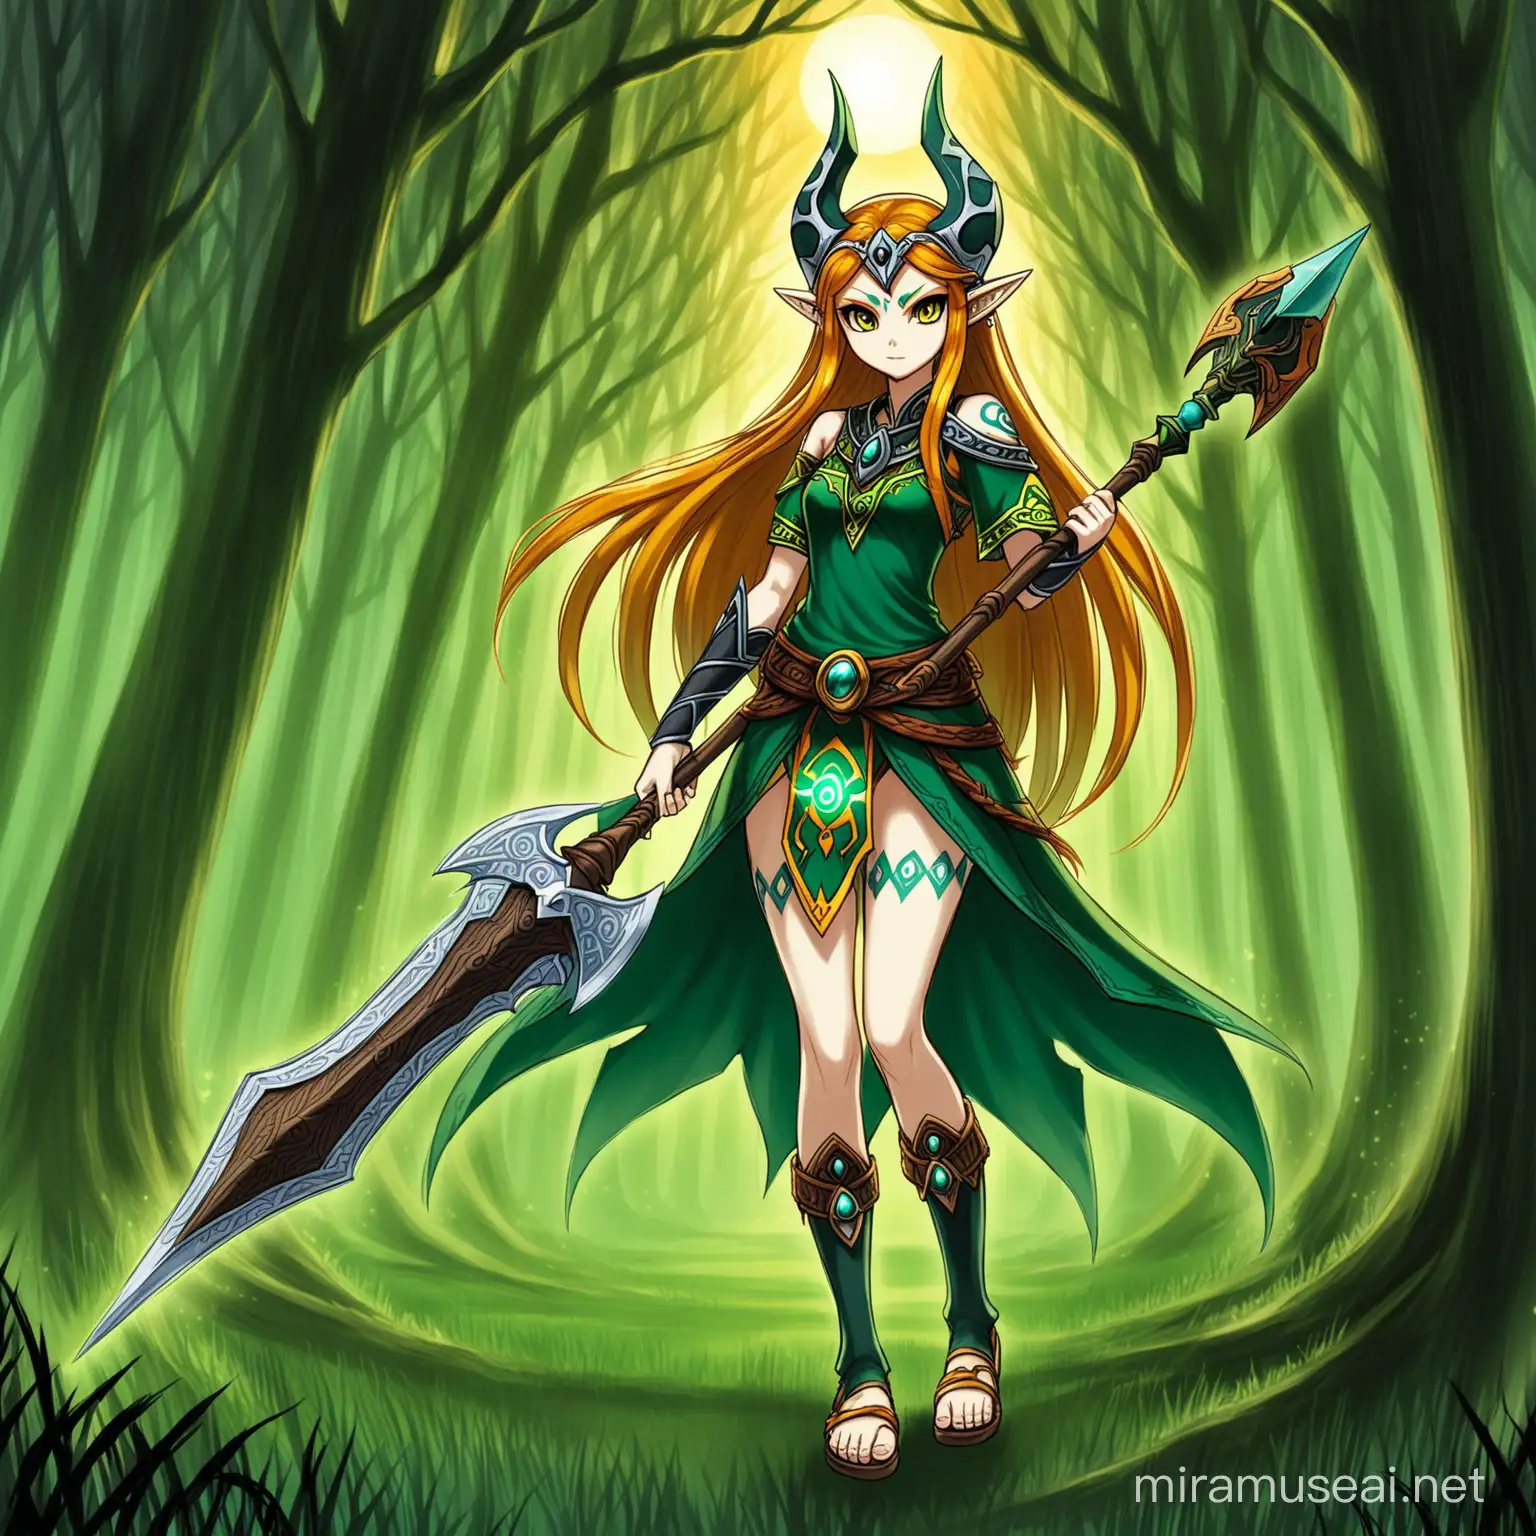 Make a drawing of human Midna from Zelda Twilight Princess. She holds a halberd on her shoulder and cast a spell with her other hand. There is a haunted forest and shadows in the background.